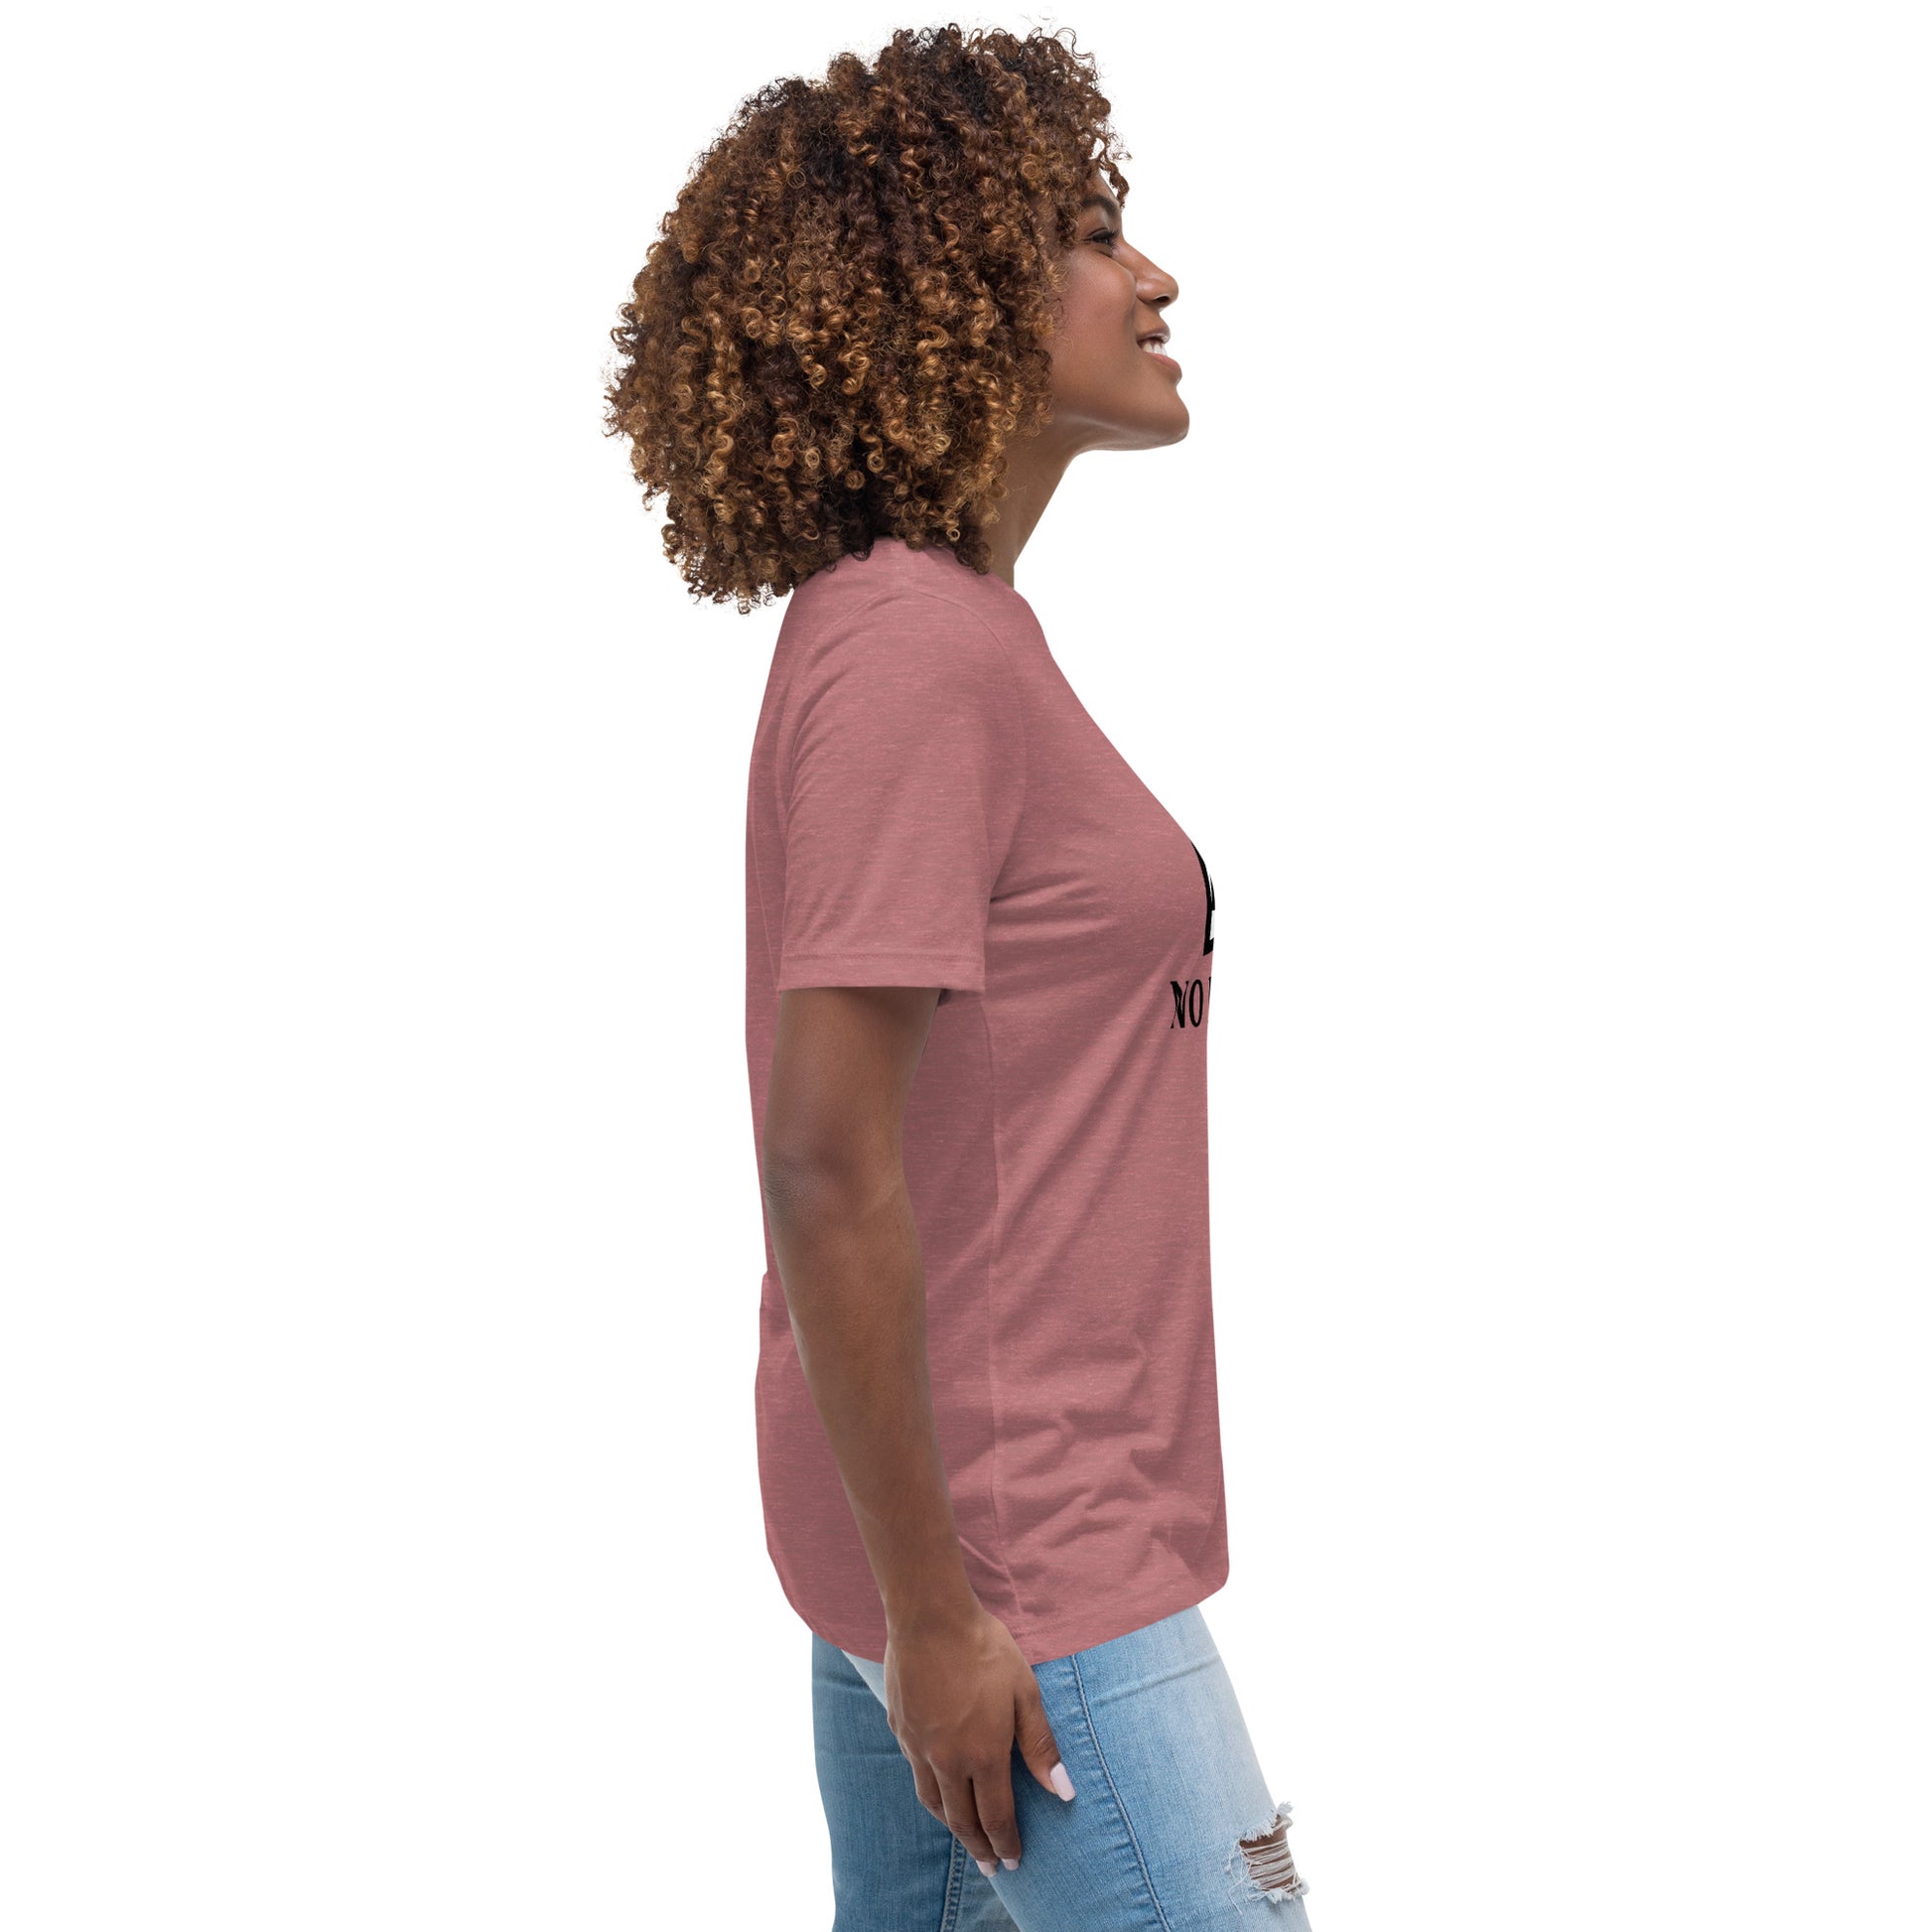 Women with mauve t-shirt with image and text "no image available"